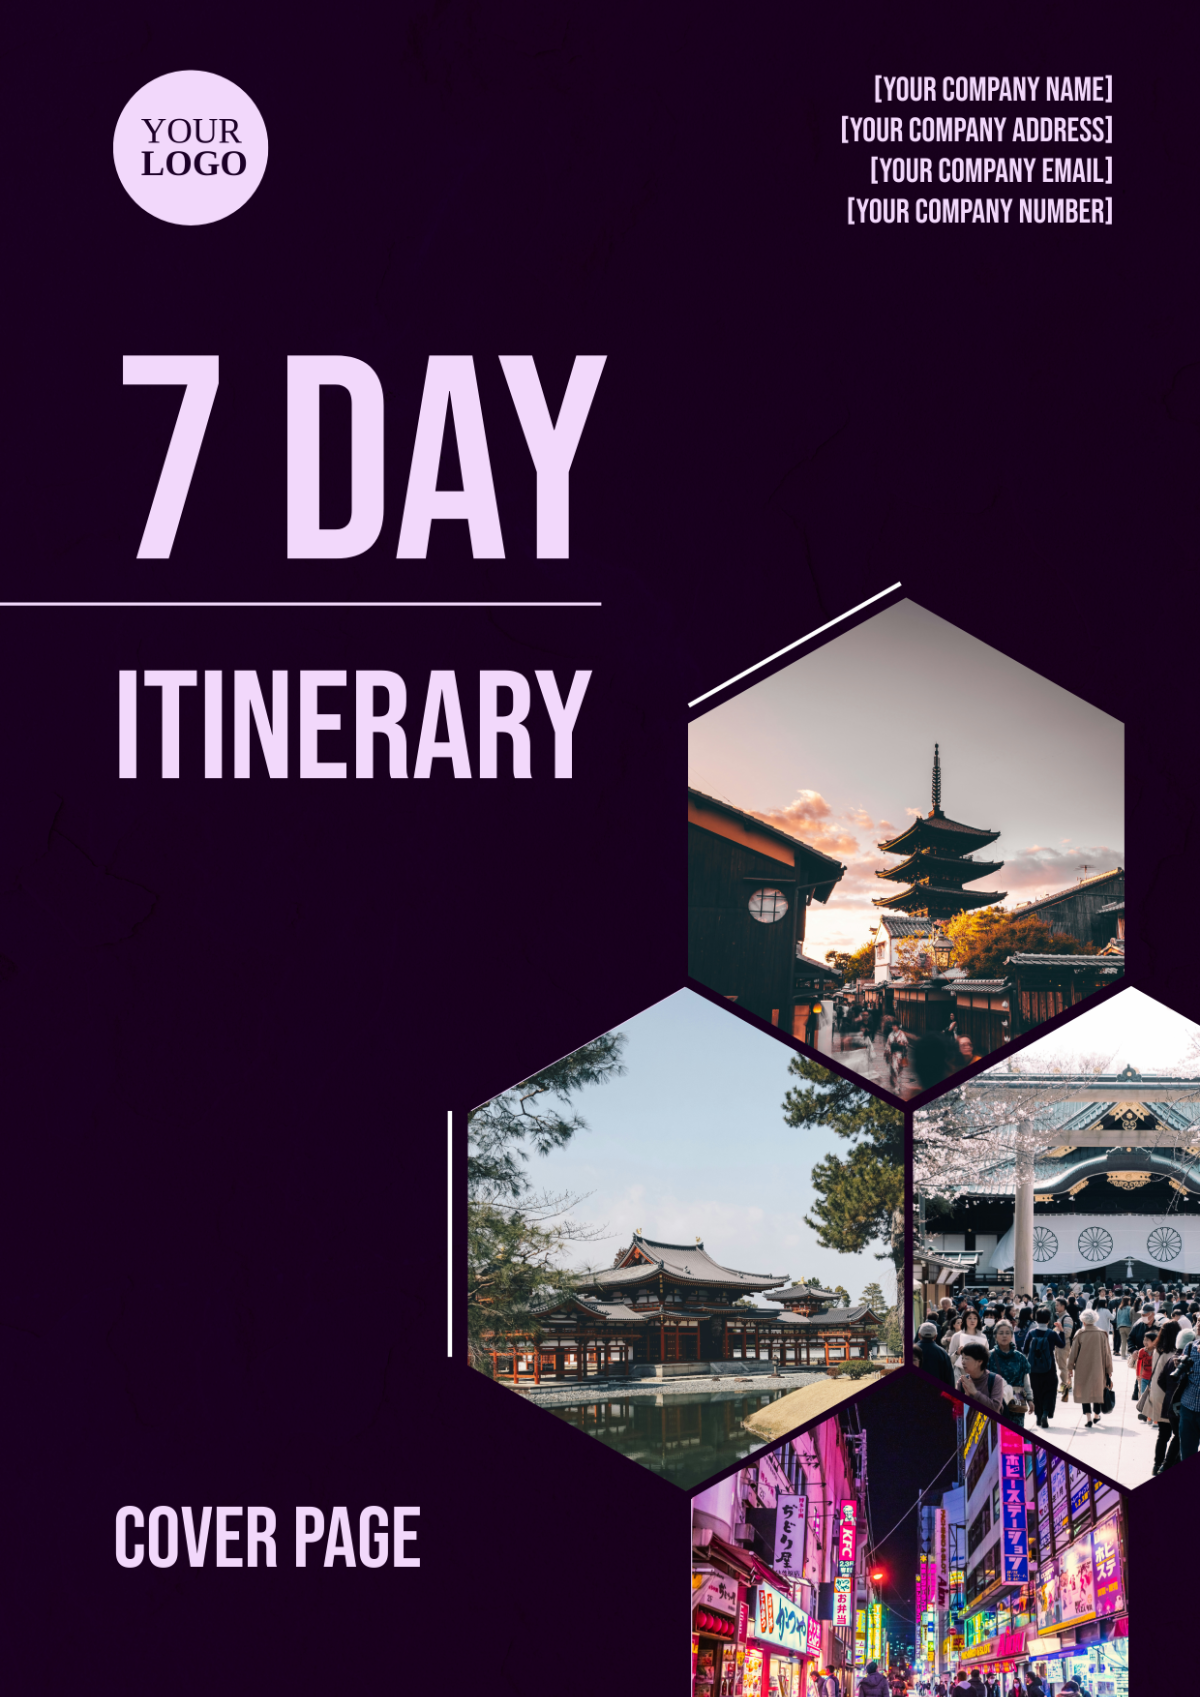 7 Day Itinerary Cover Page